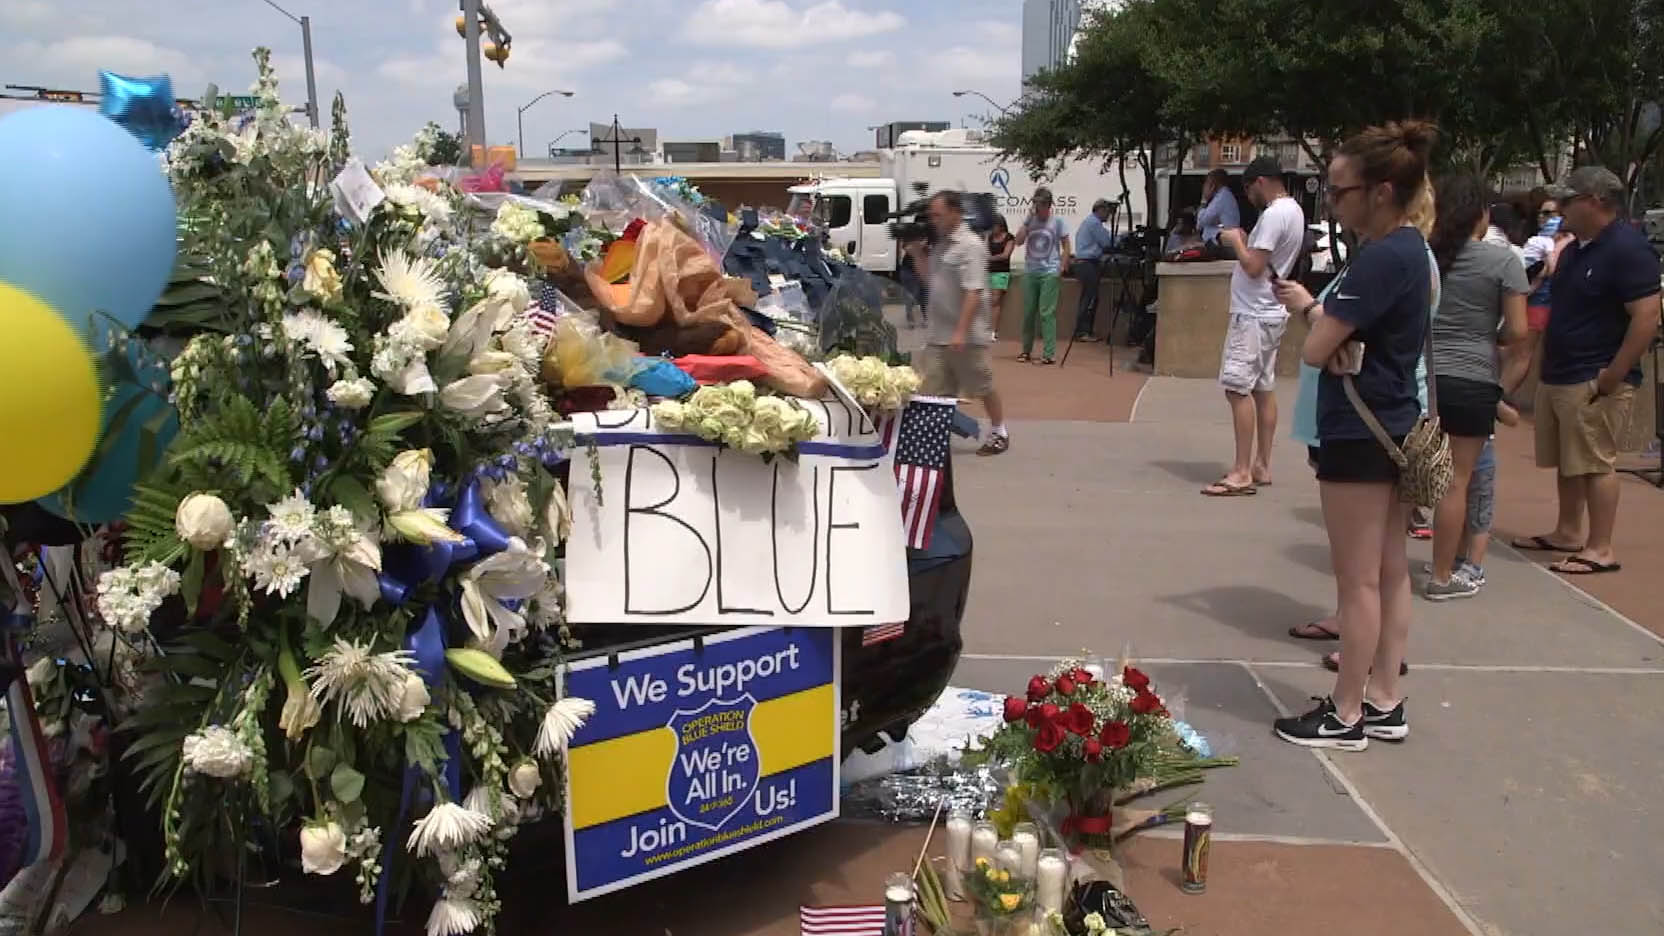 Memorials for victims of shooting in Dallas